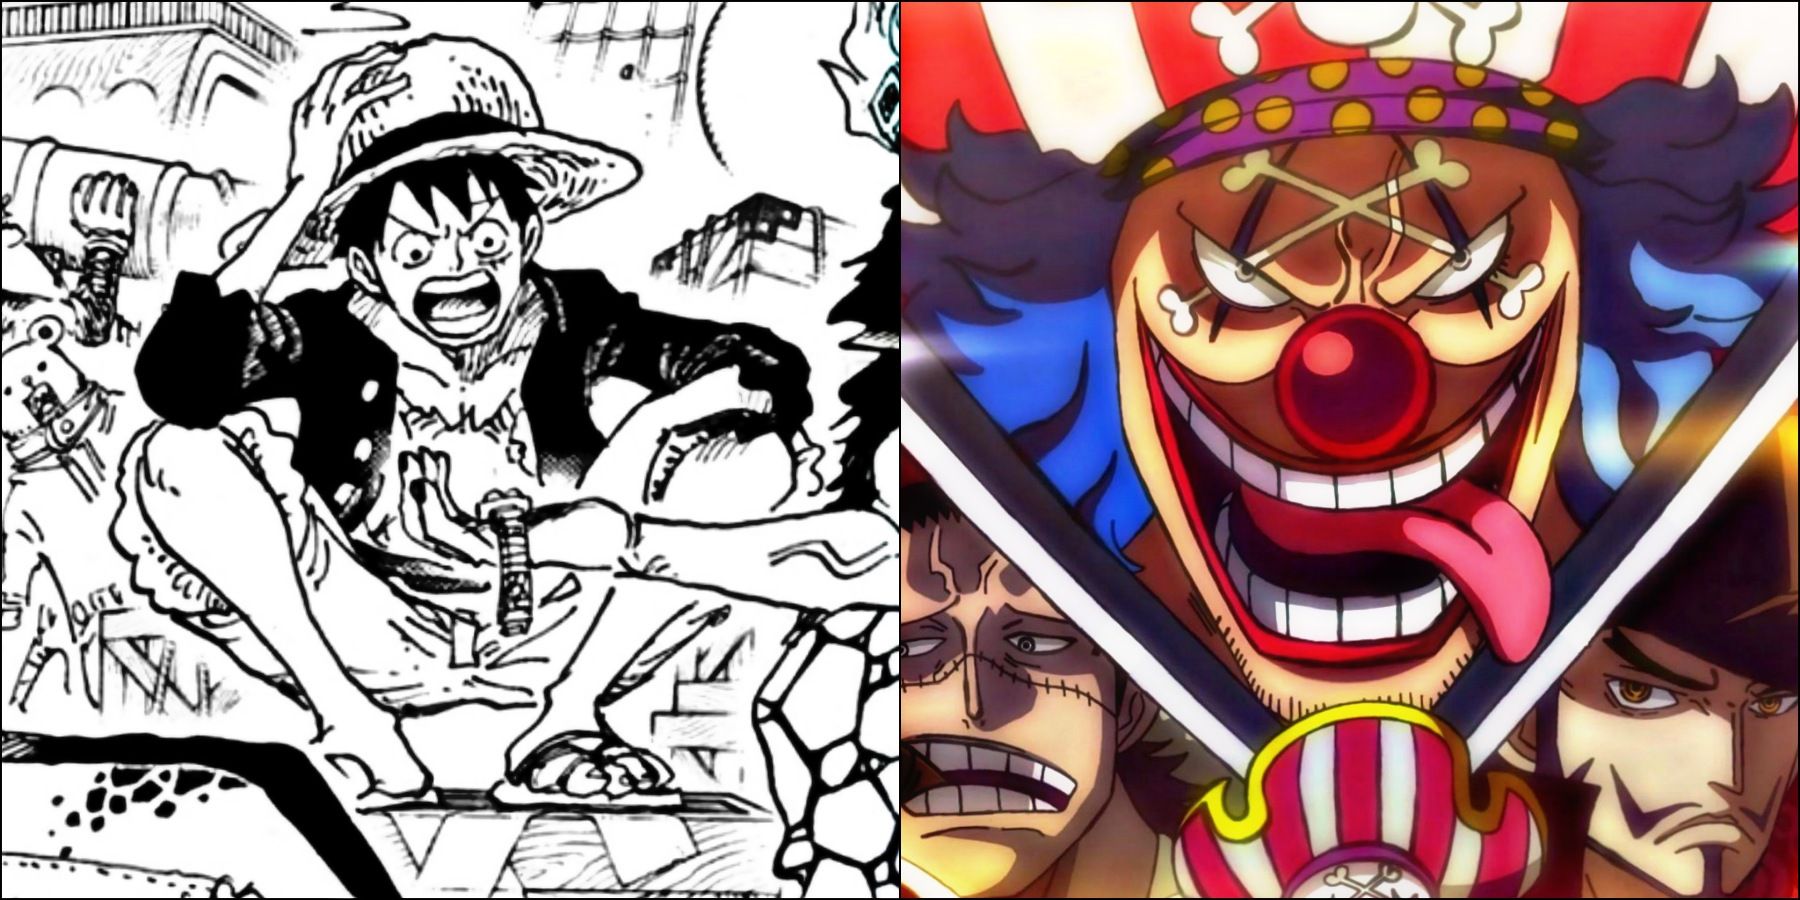 One Piece 1058 reveals everything about Cross Guild